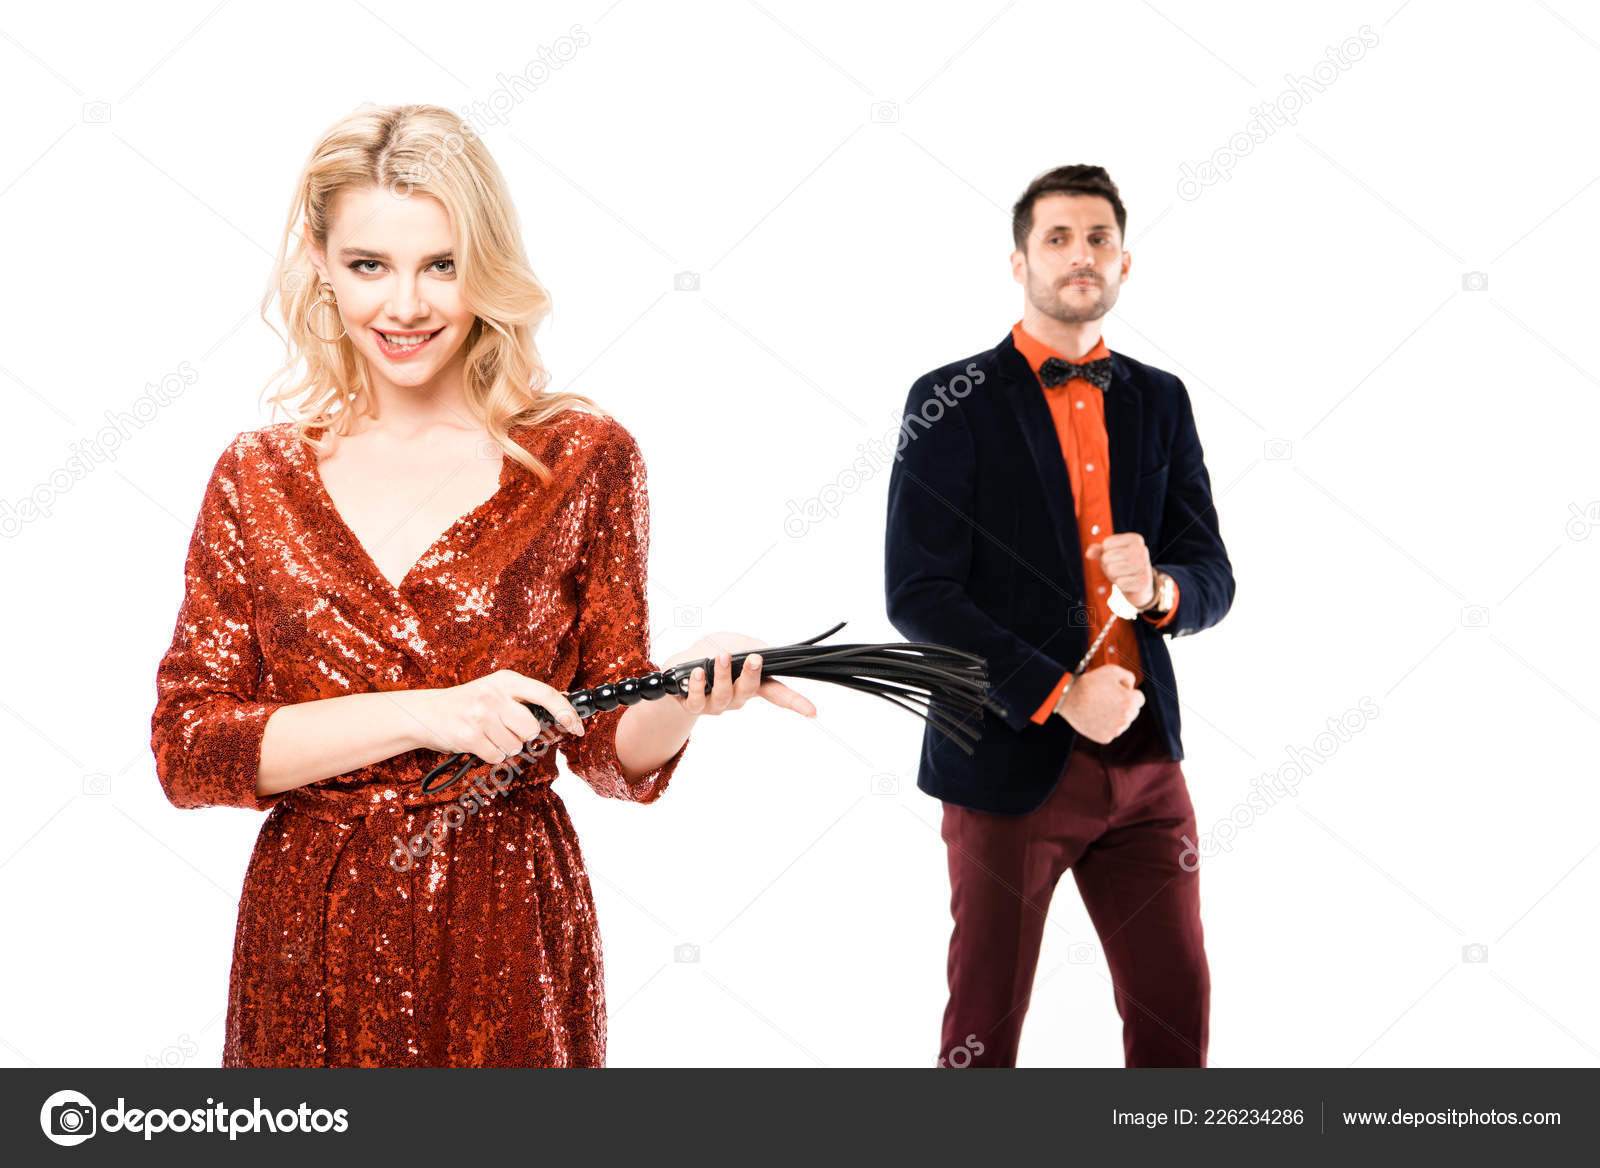 750+ Women Whipping Men Stock Photos, Pictures & Royalty-Free Images -  iStock